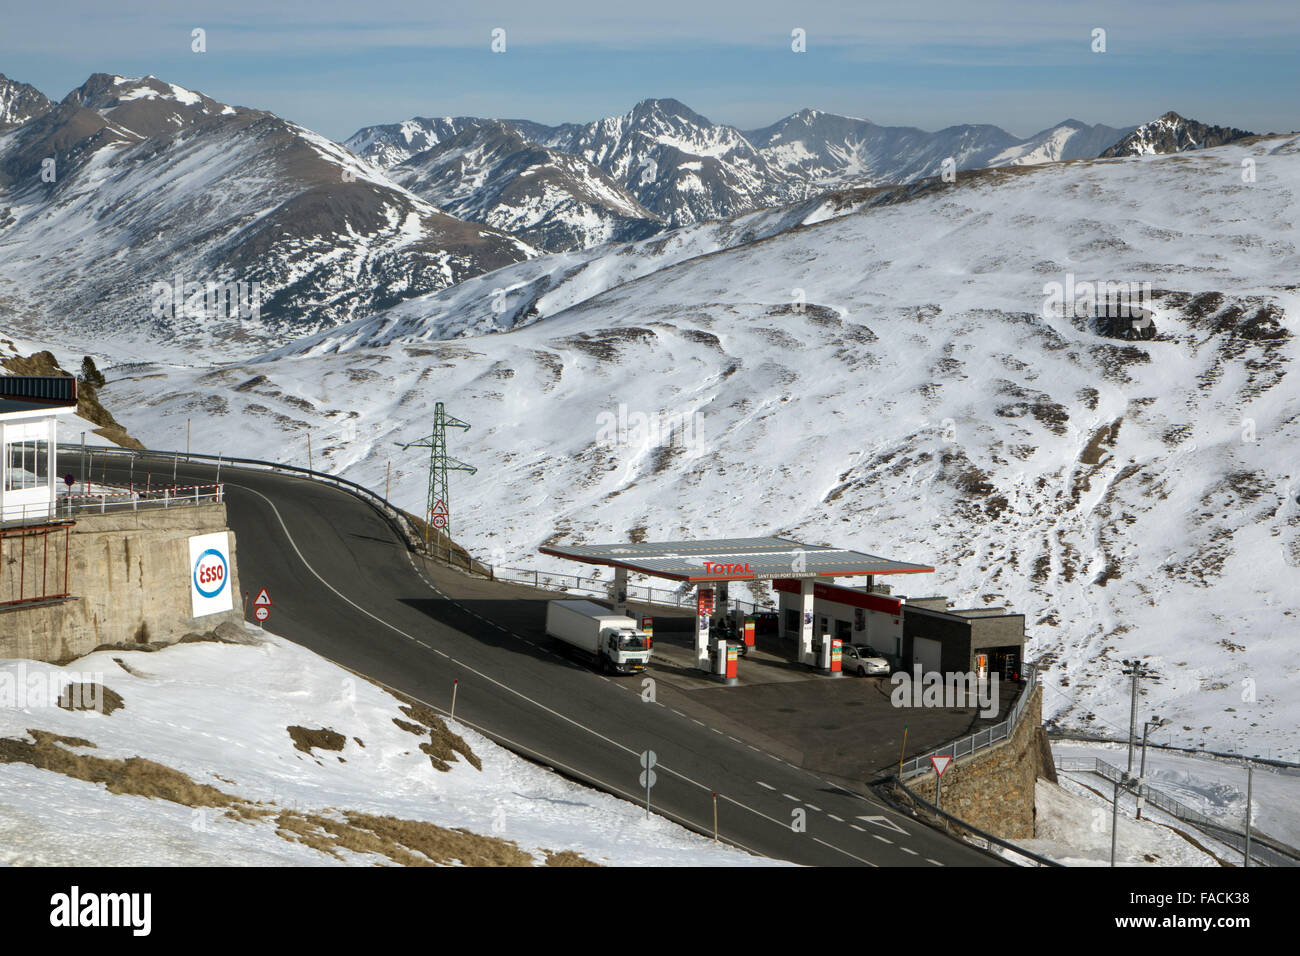 Total Gas station, petrol station, snowy mountains, wild setting, winter, snowy Stock Photo